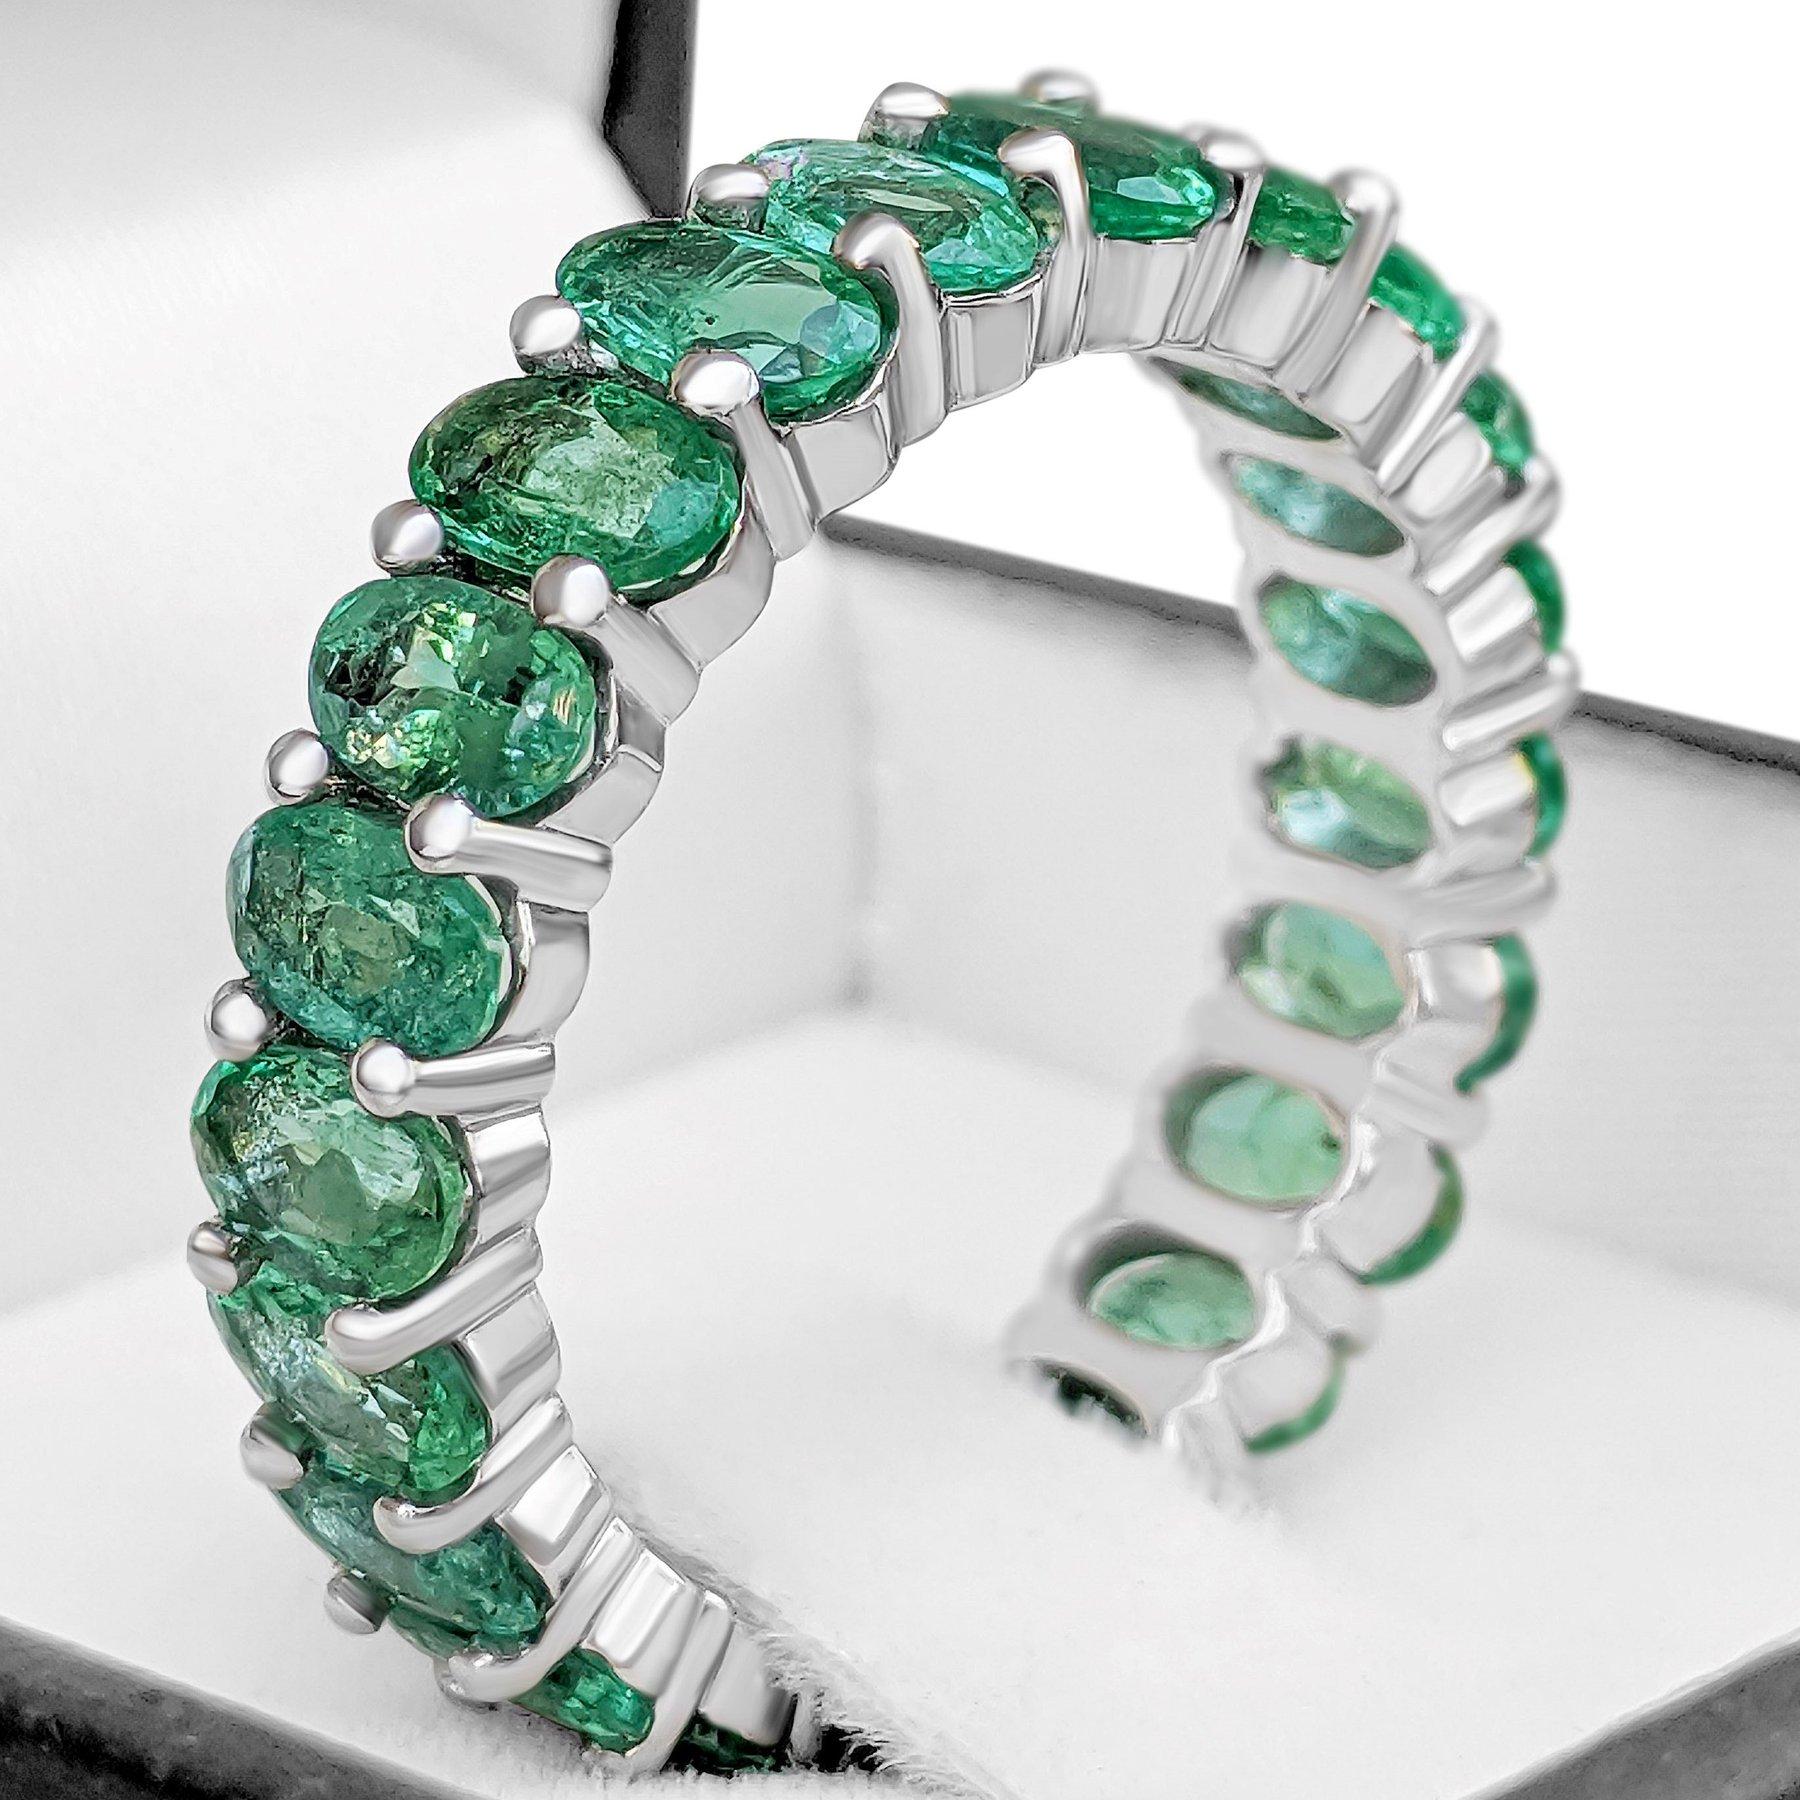 Oval Cut $1 NO RESERVE! 5.73 cttw Natural Emeralds Eternity Band - 14k White Gold